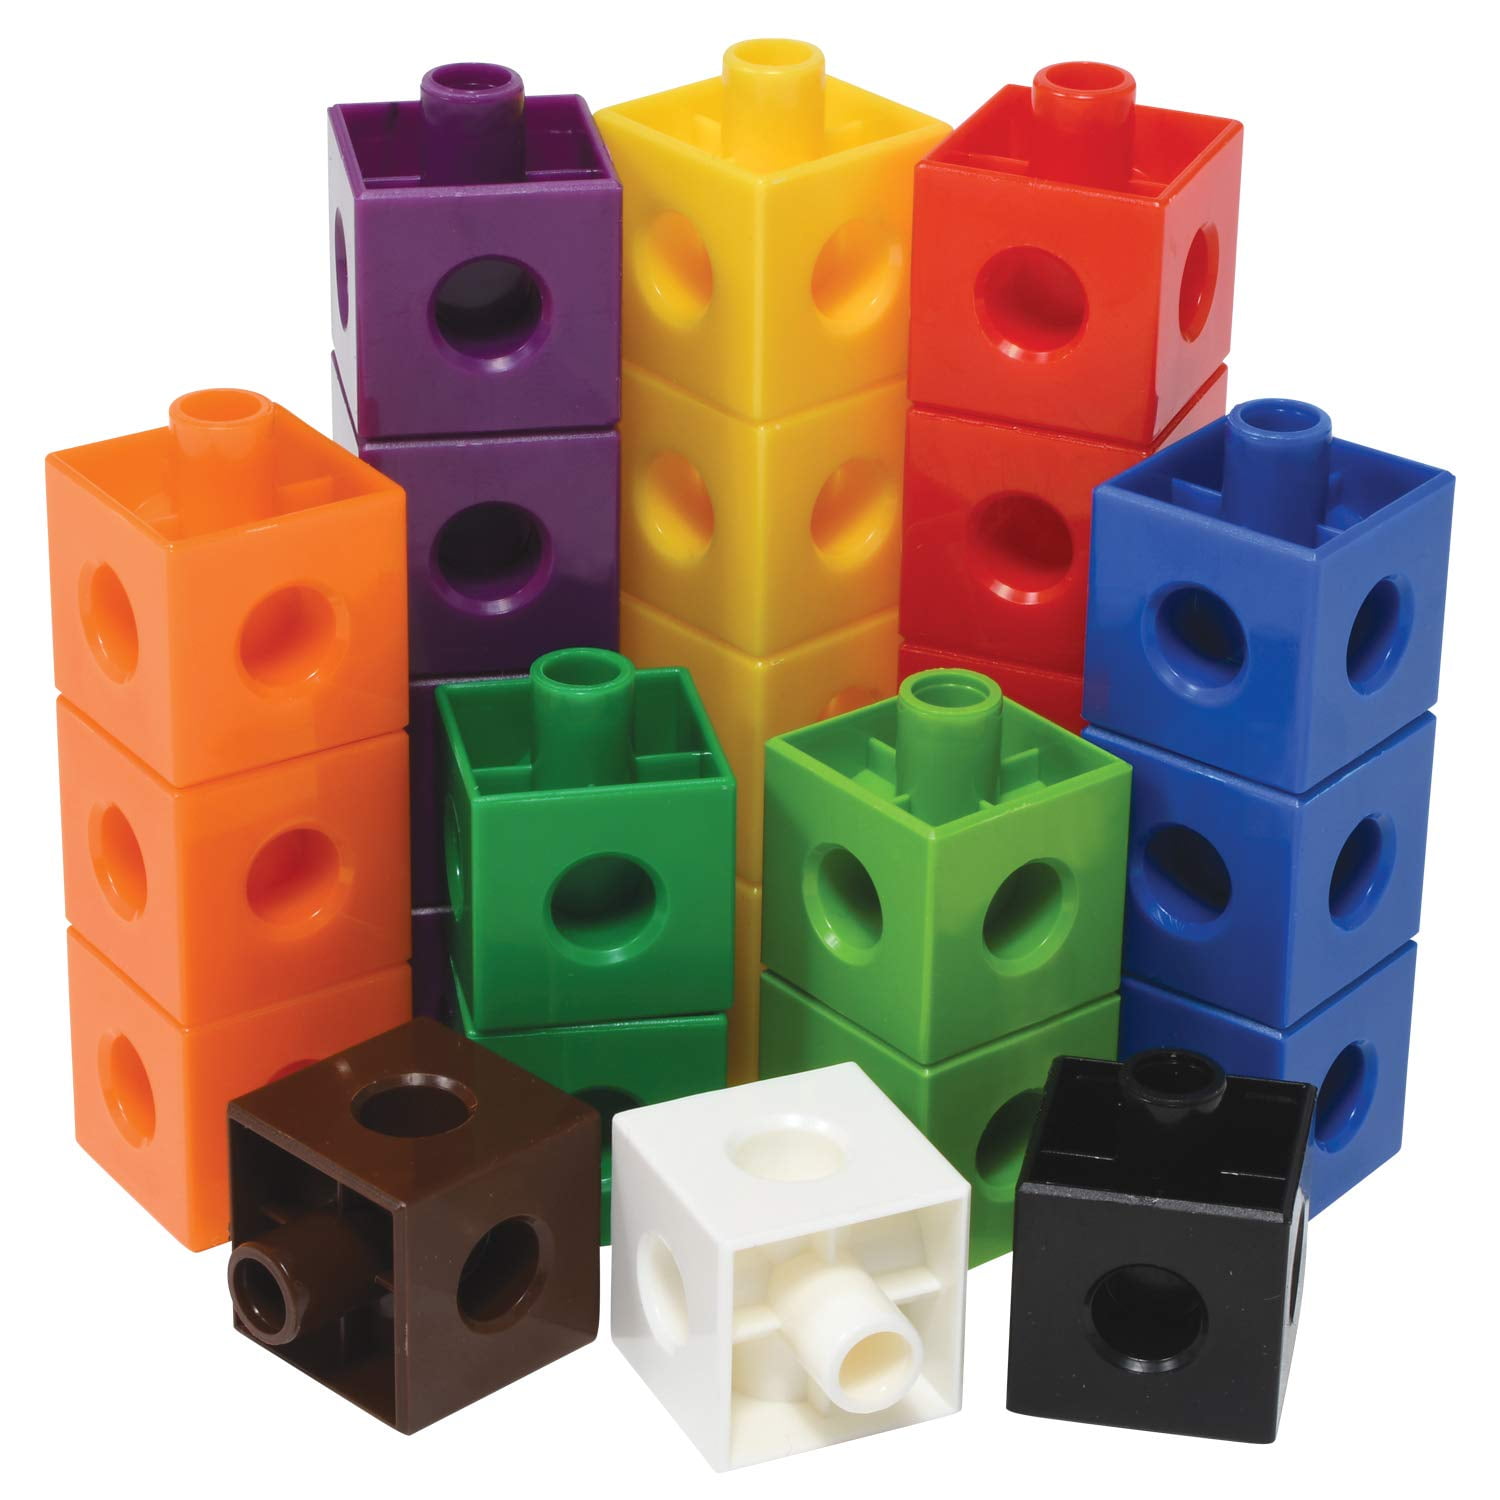 New Pack of 50 red cubes 2cm x 2cm x 2cm Maths Link Counting Cubes 